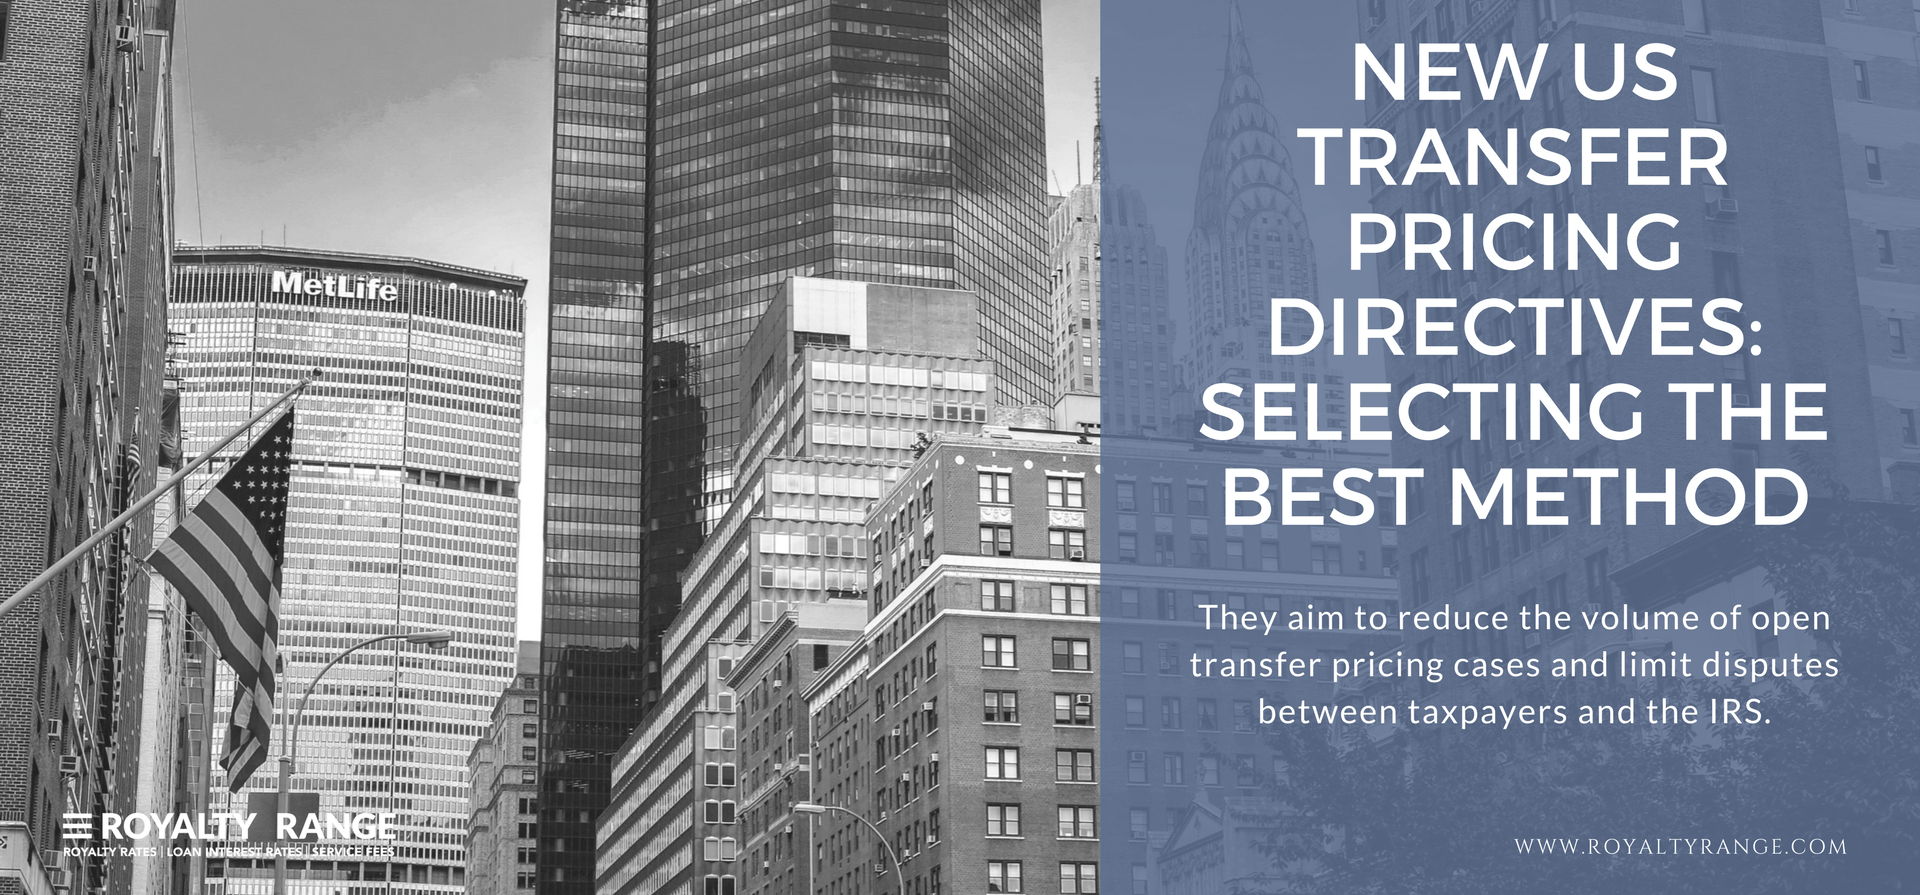 New US transfer pricing Directives: selecting the best method